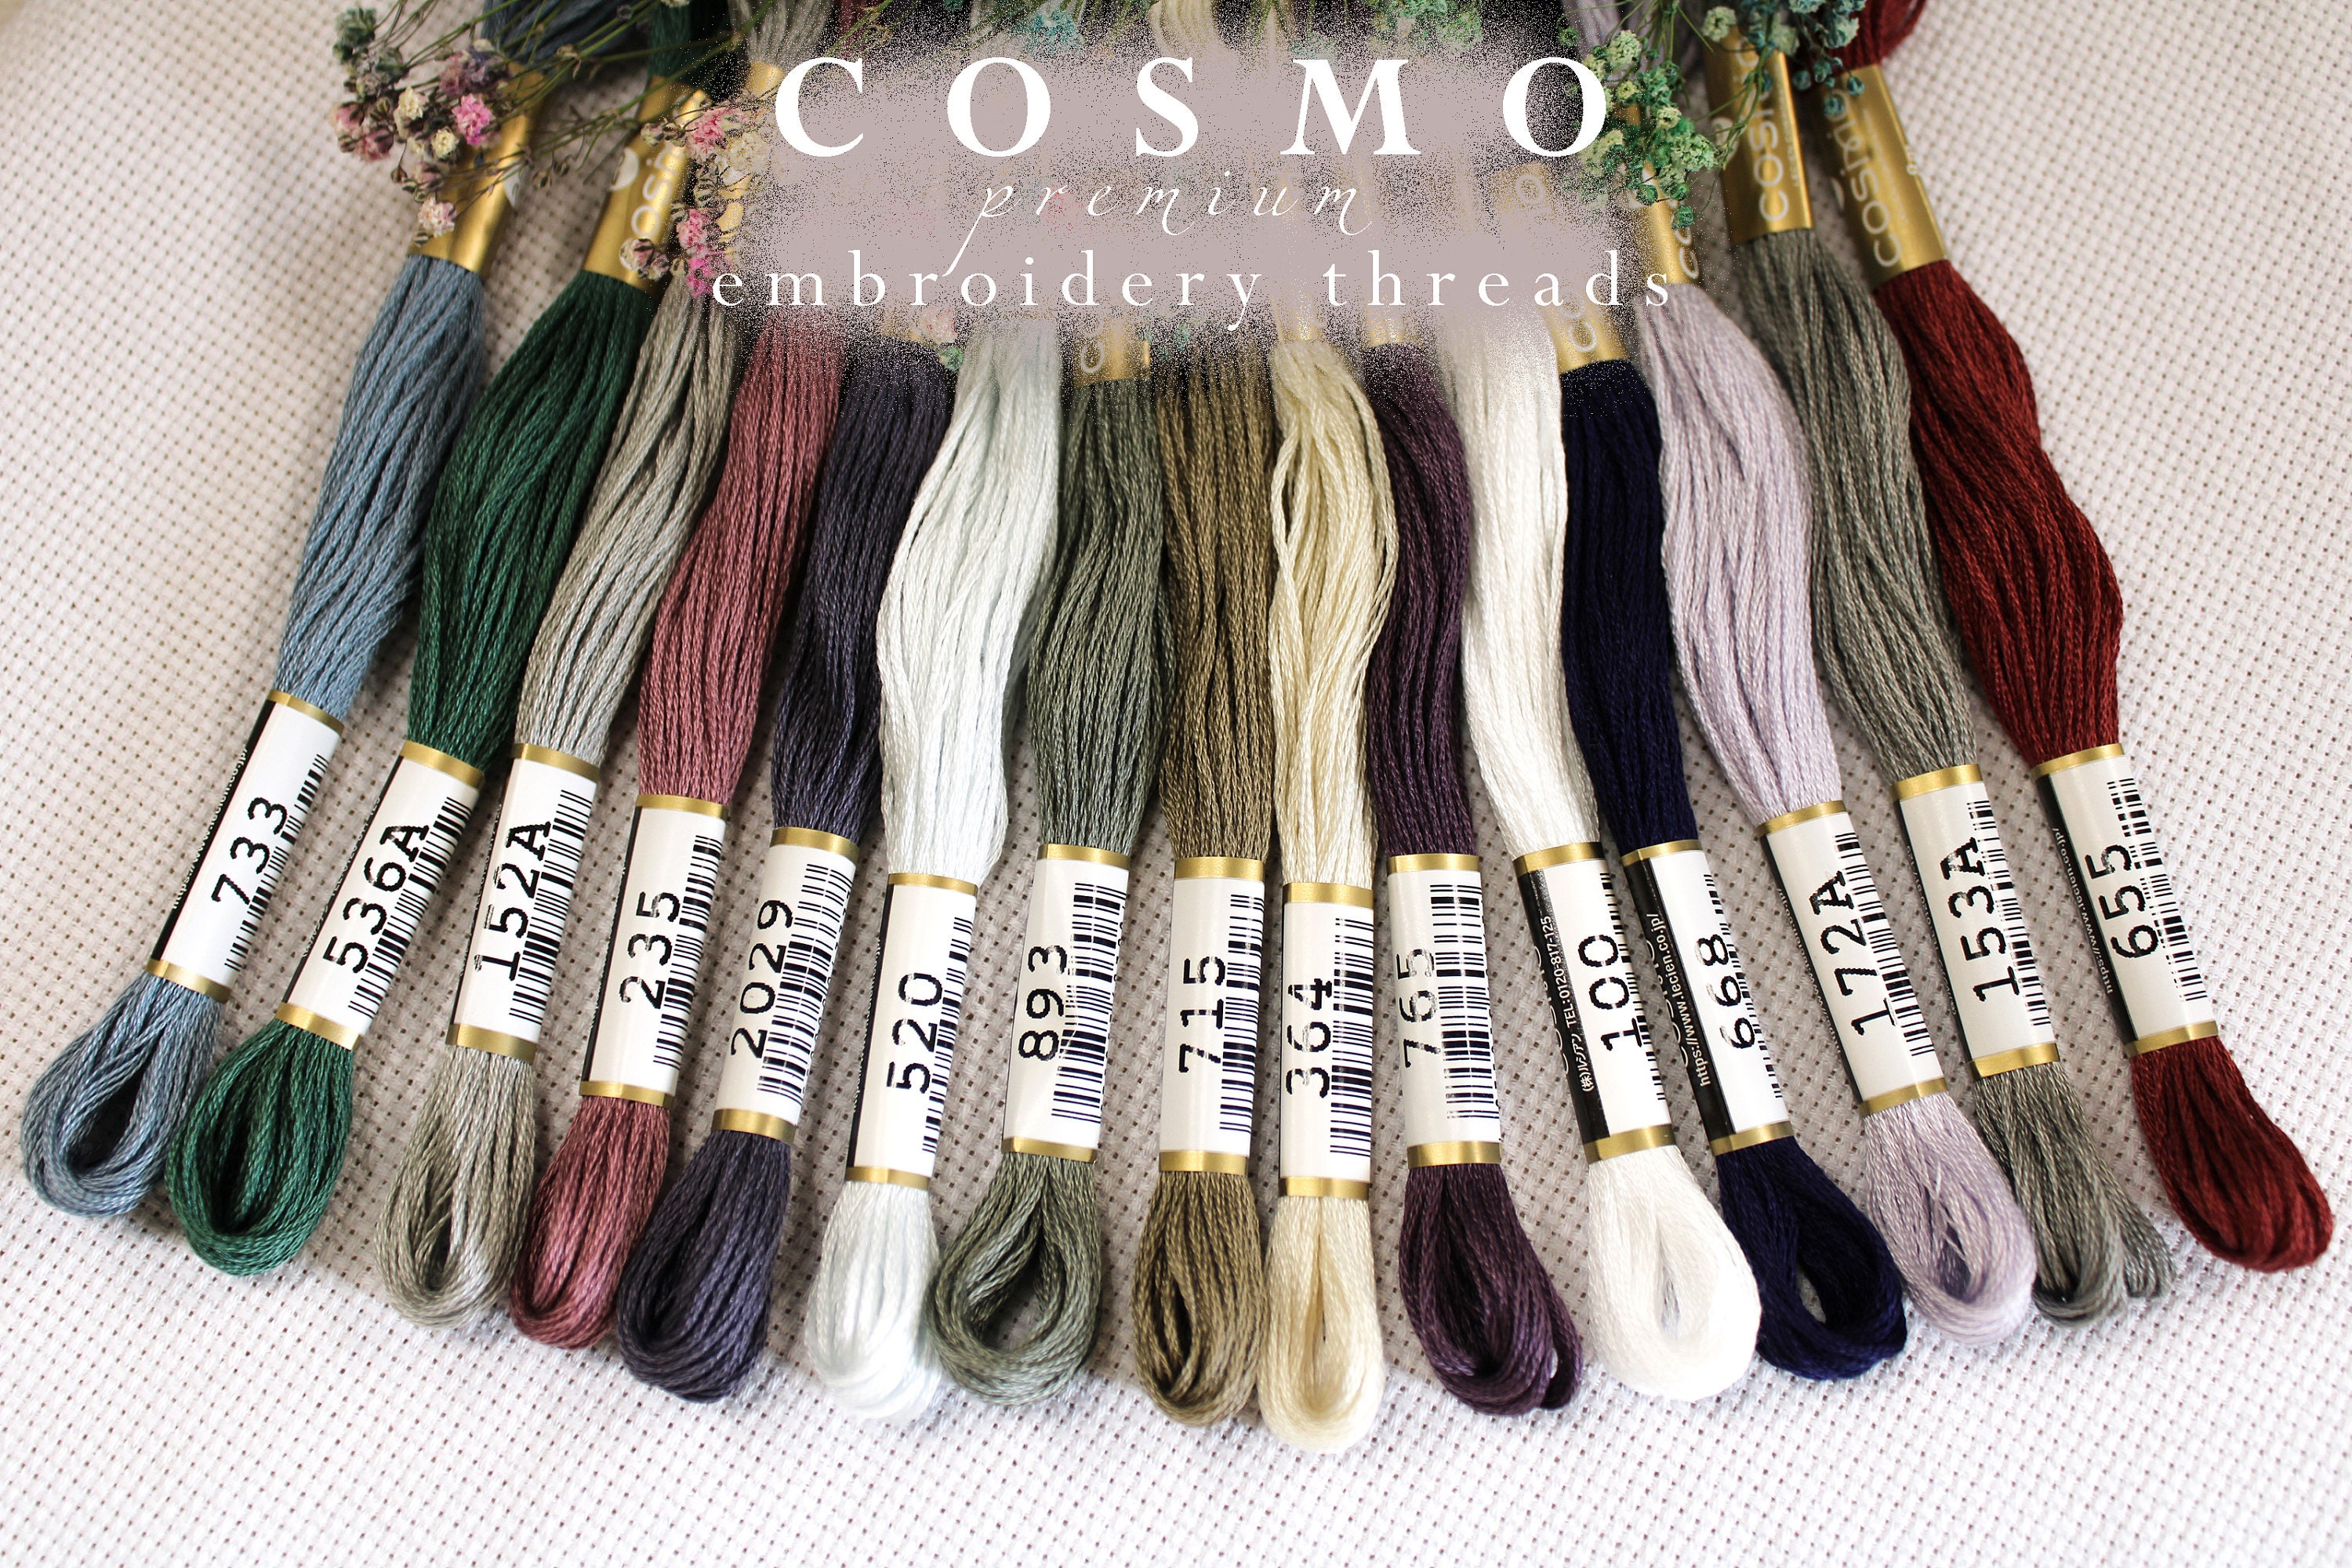 Cosmo Embroidery Floss, Black & White